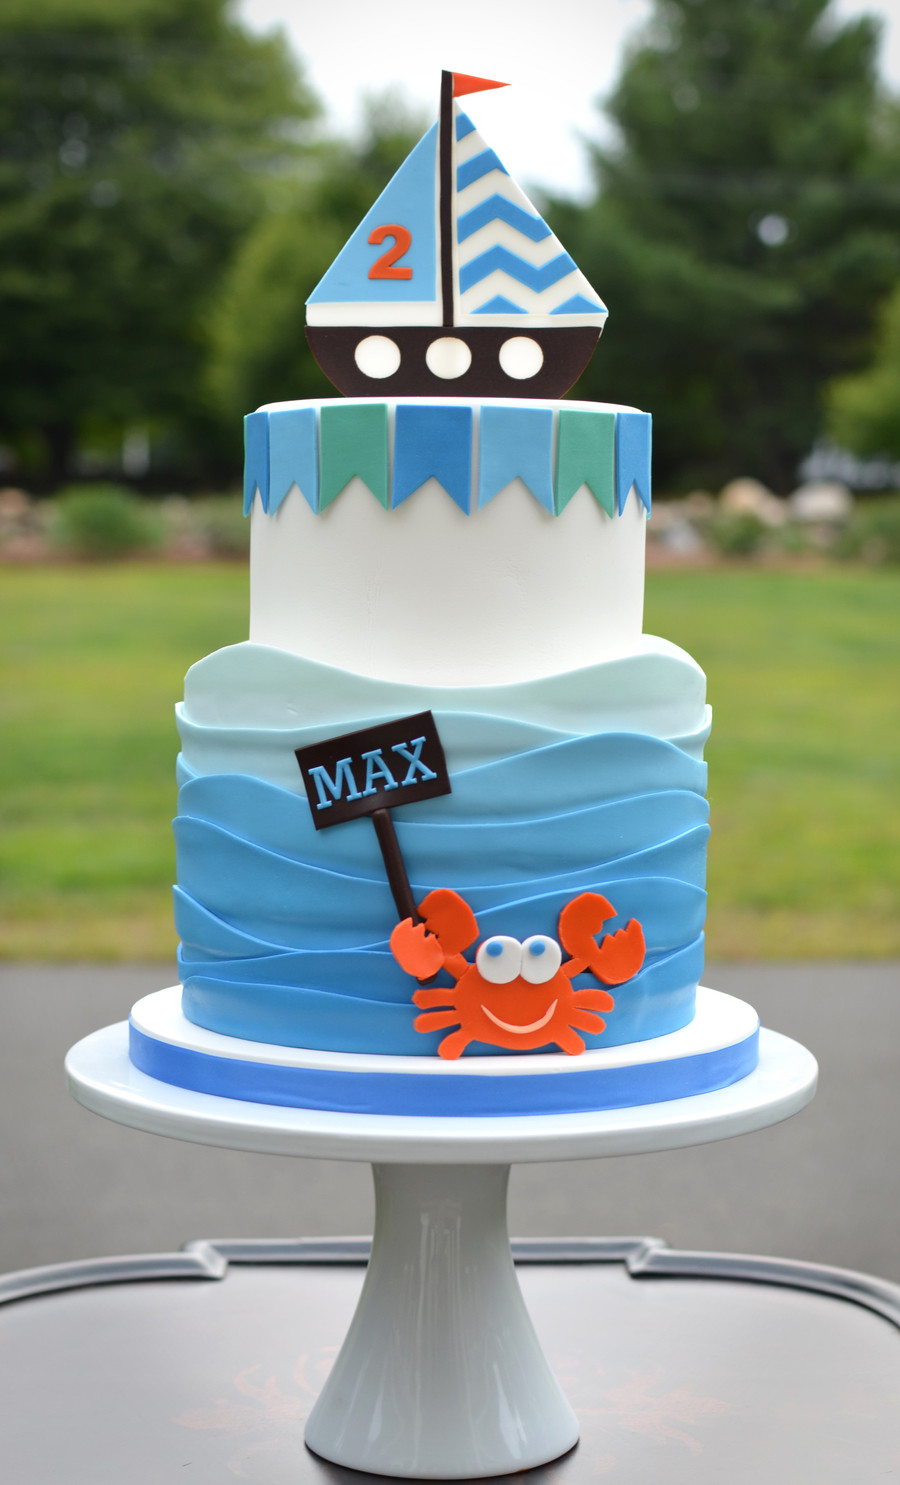 2 Year Old Birthday Cake
 Fun 2 Year Old Birthday Cake With Waves Sailboat And Crab